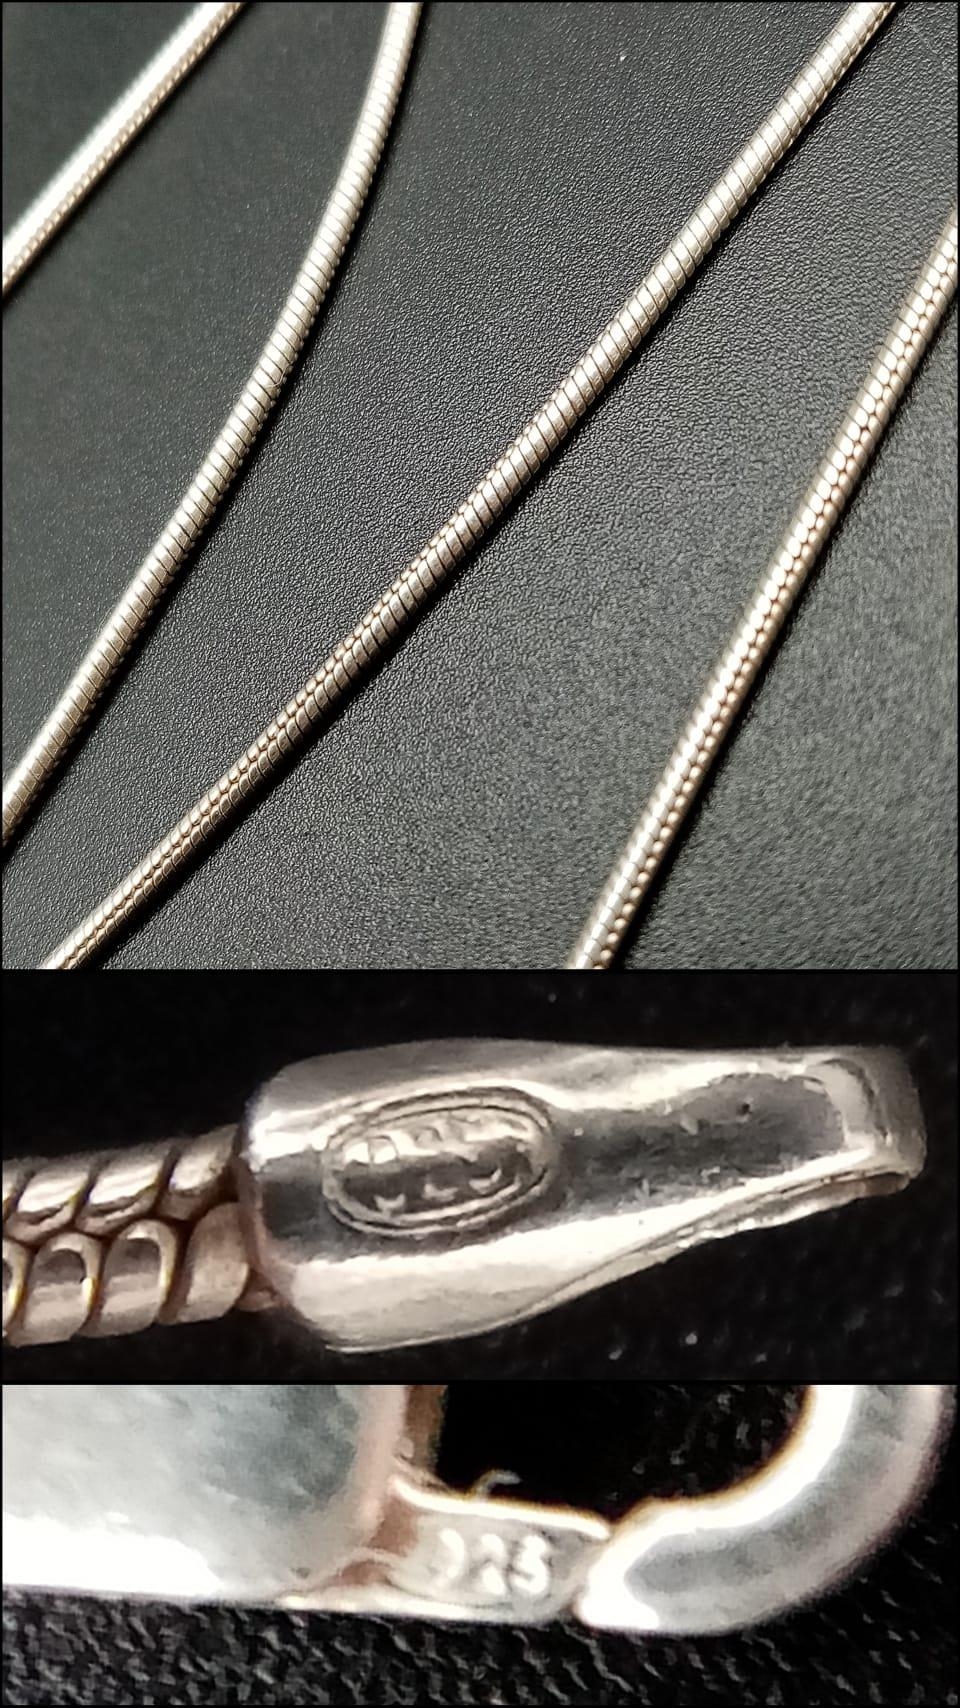 Four Sterling Silver Necklaces. Different lengths and styles, 23.2g total weight. - Image 5 of 6